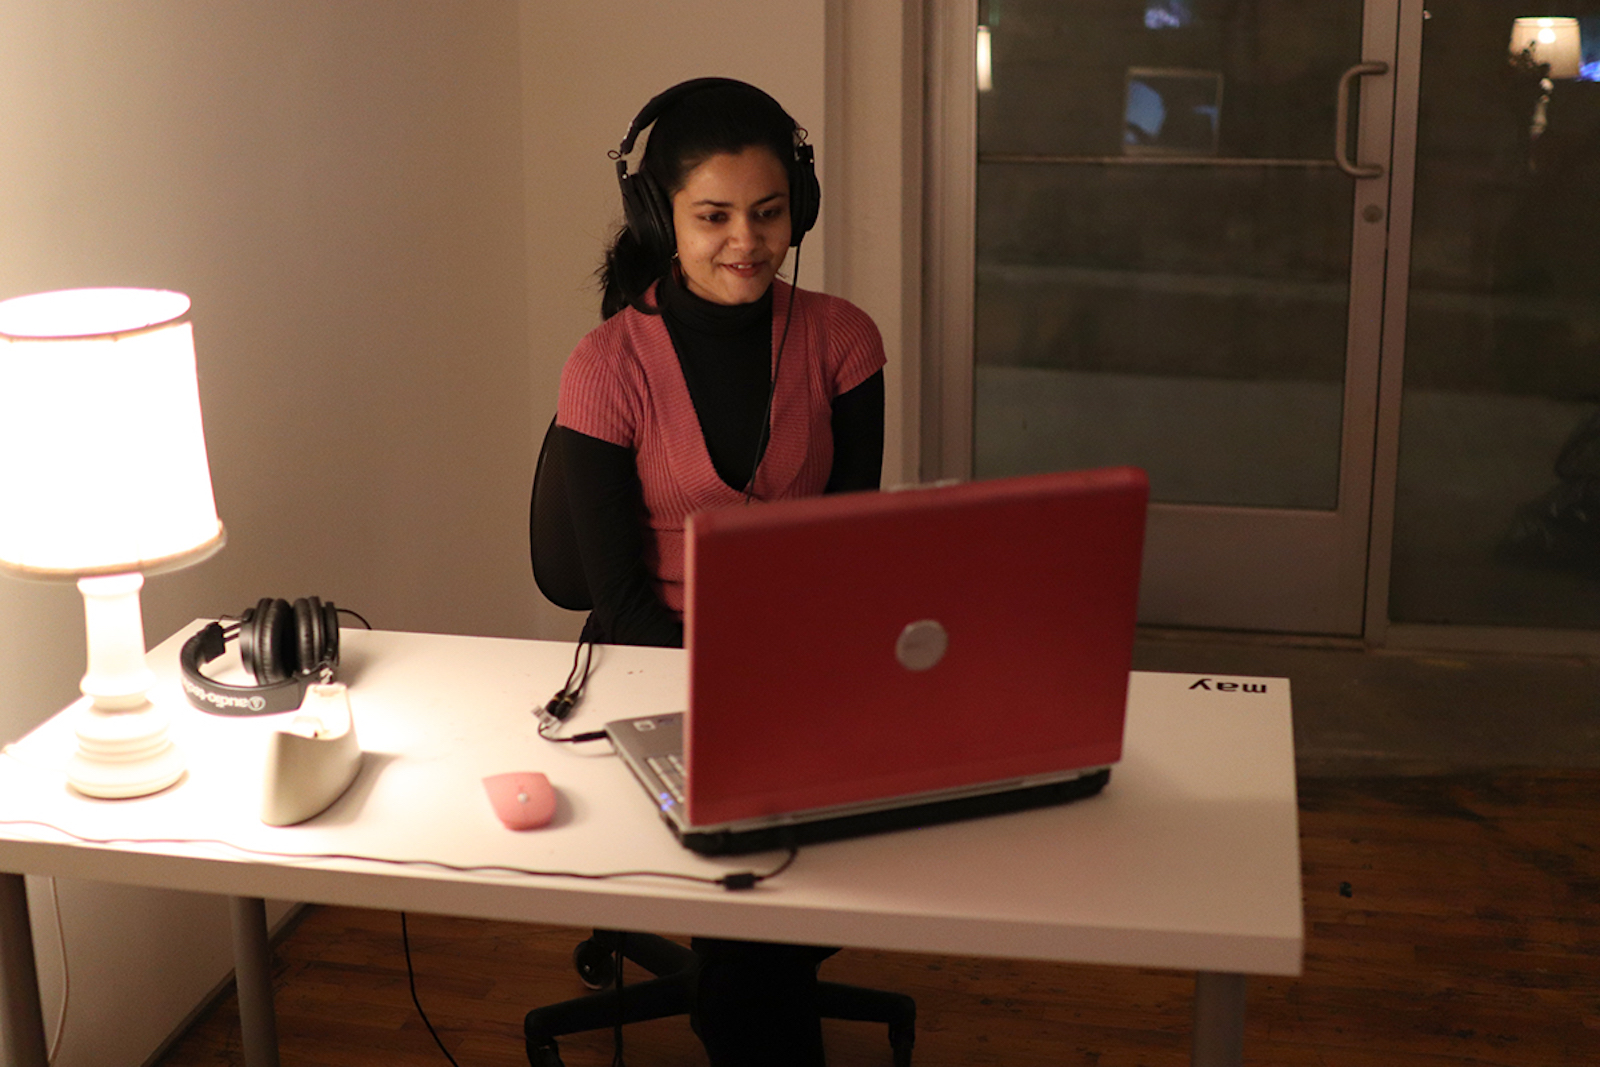 A woman watches a video on a red laptop with headphones on